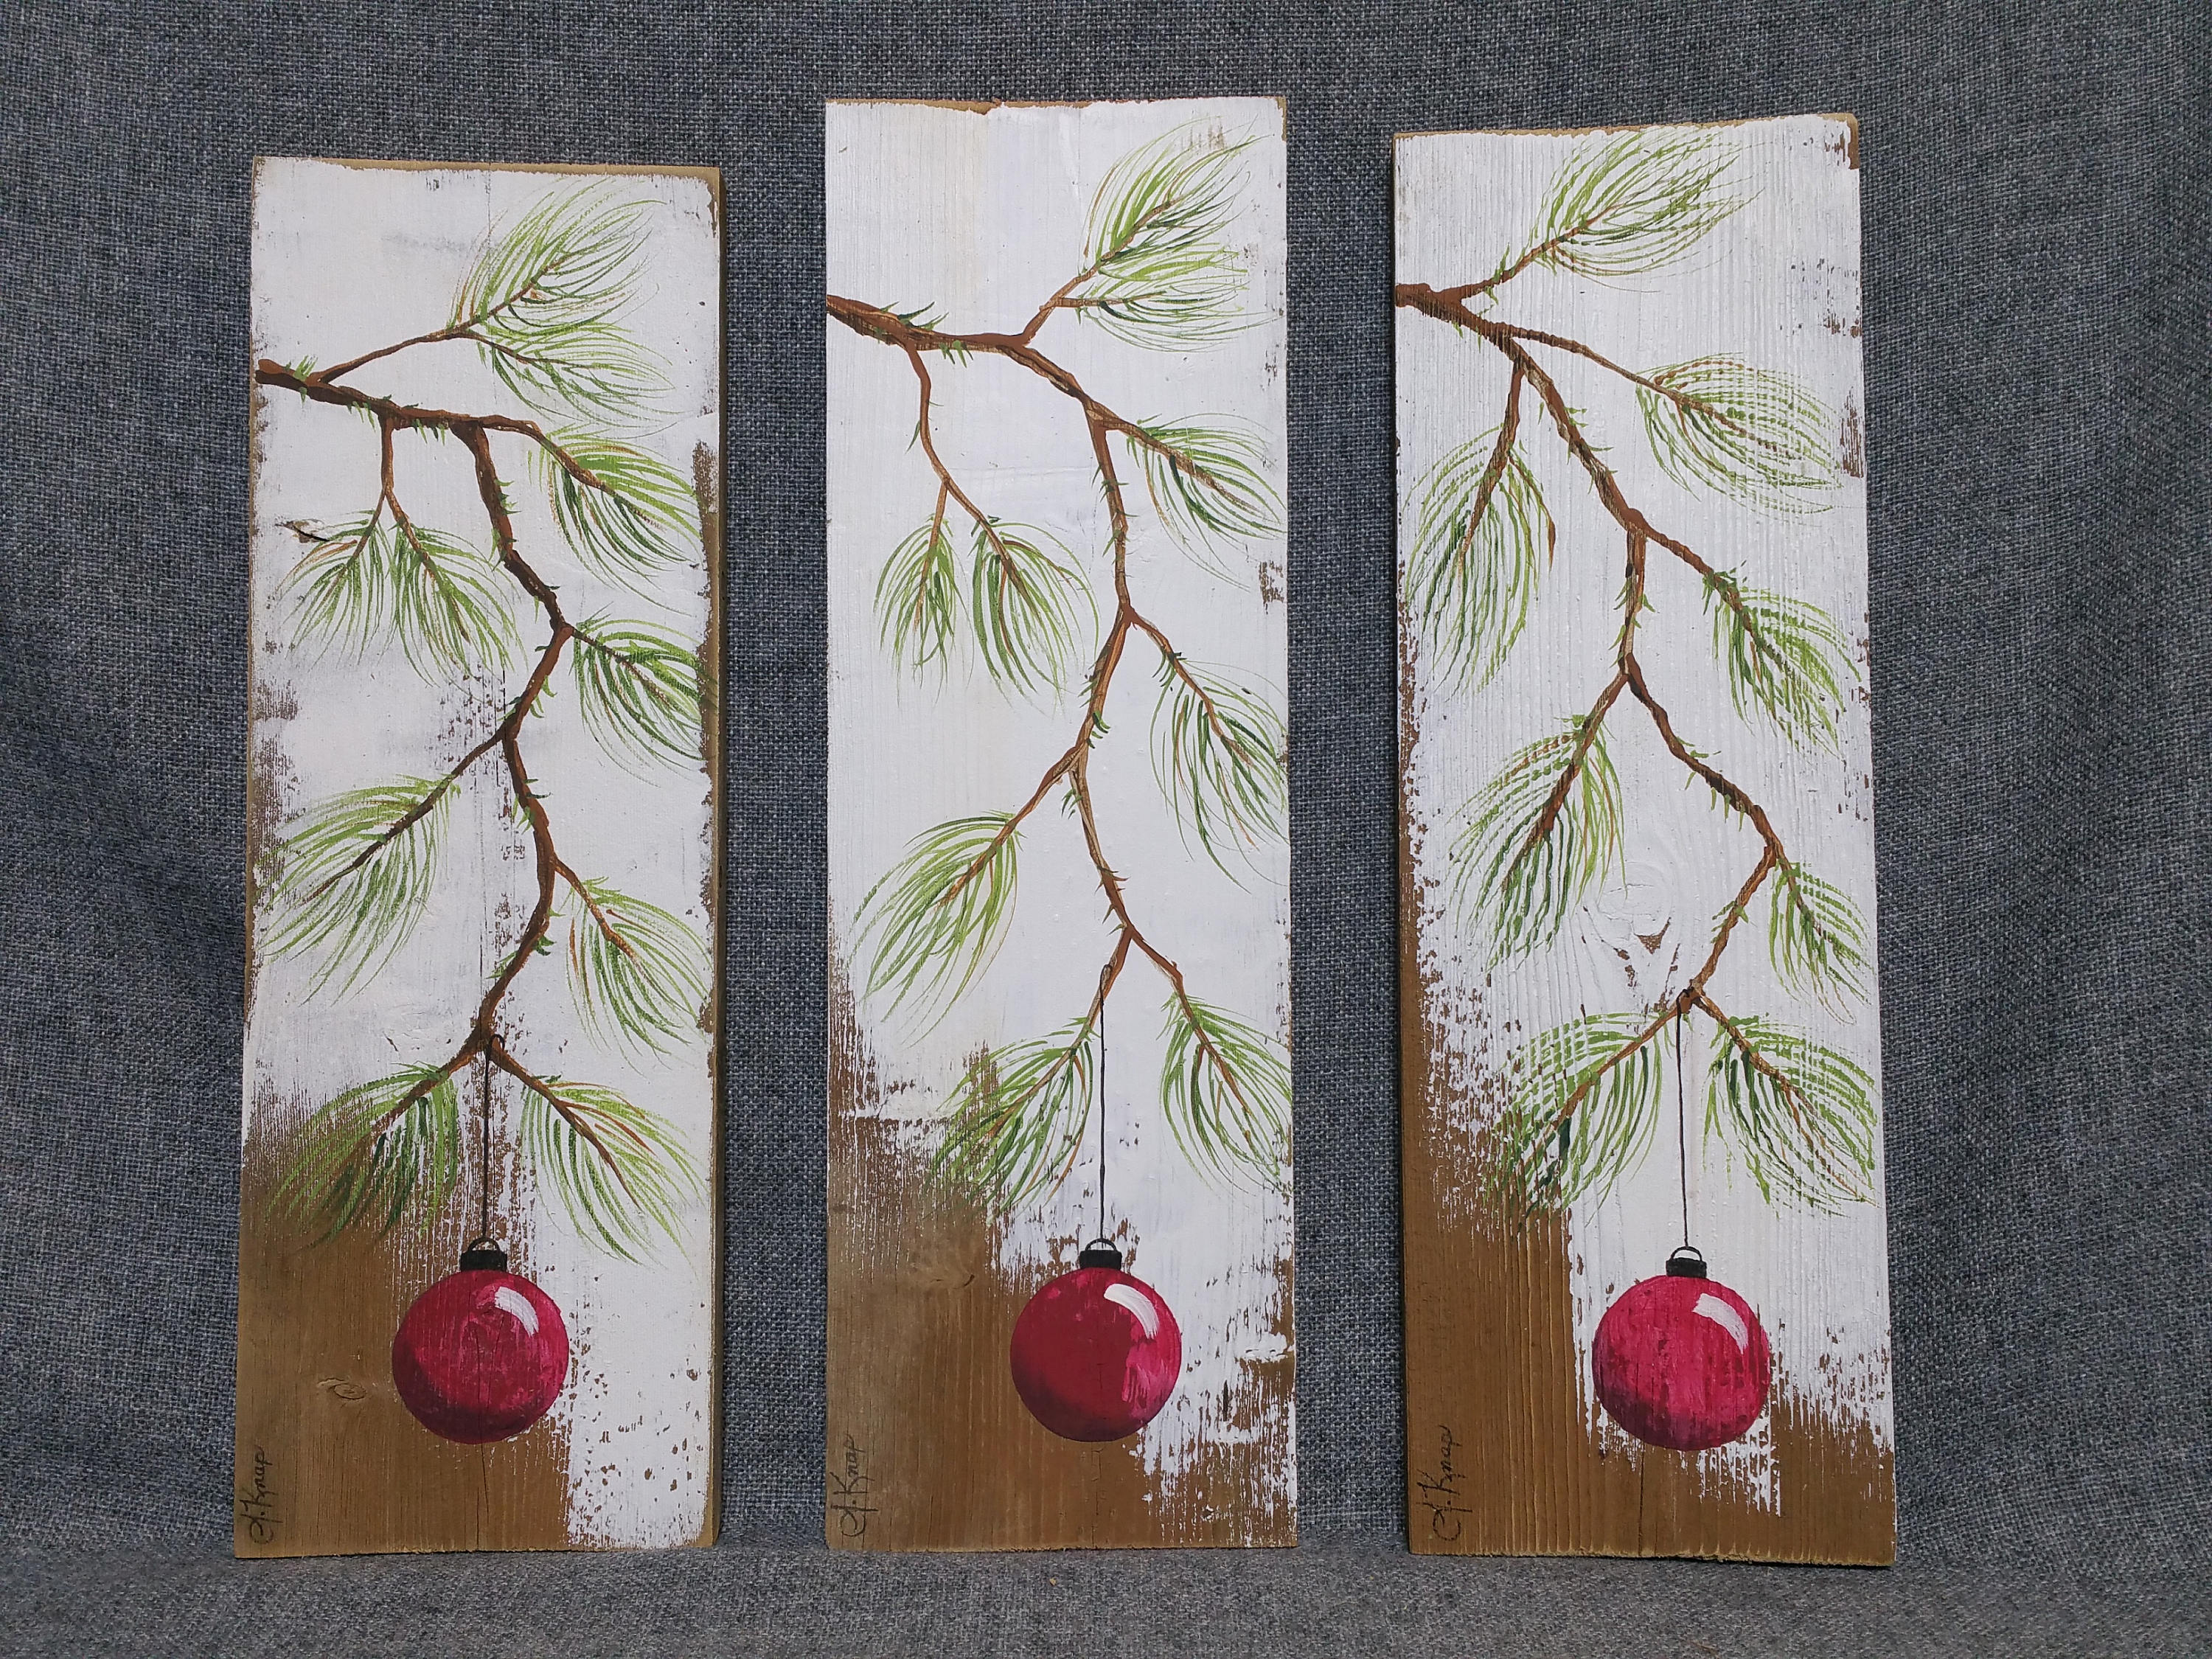 Red Christmas decoration, Hand painted Pine Branch with RED Bulb, Farmhouse white washed decor